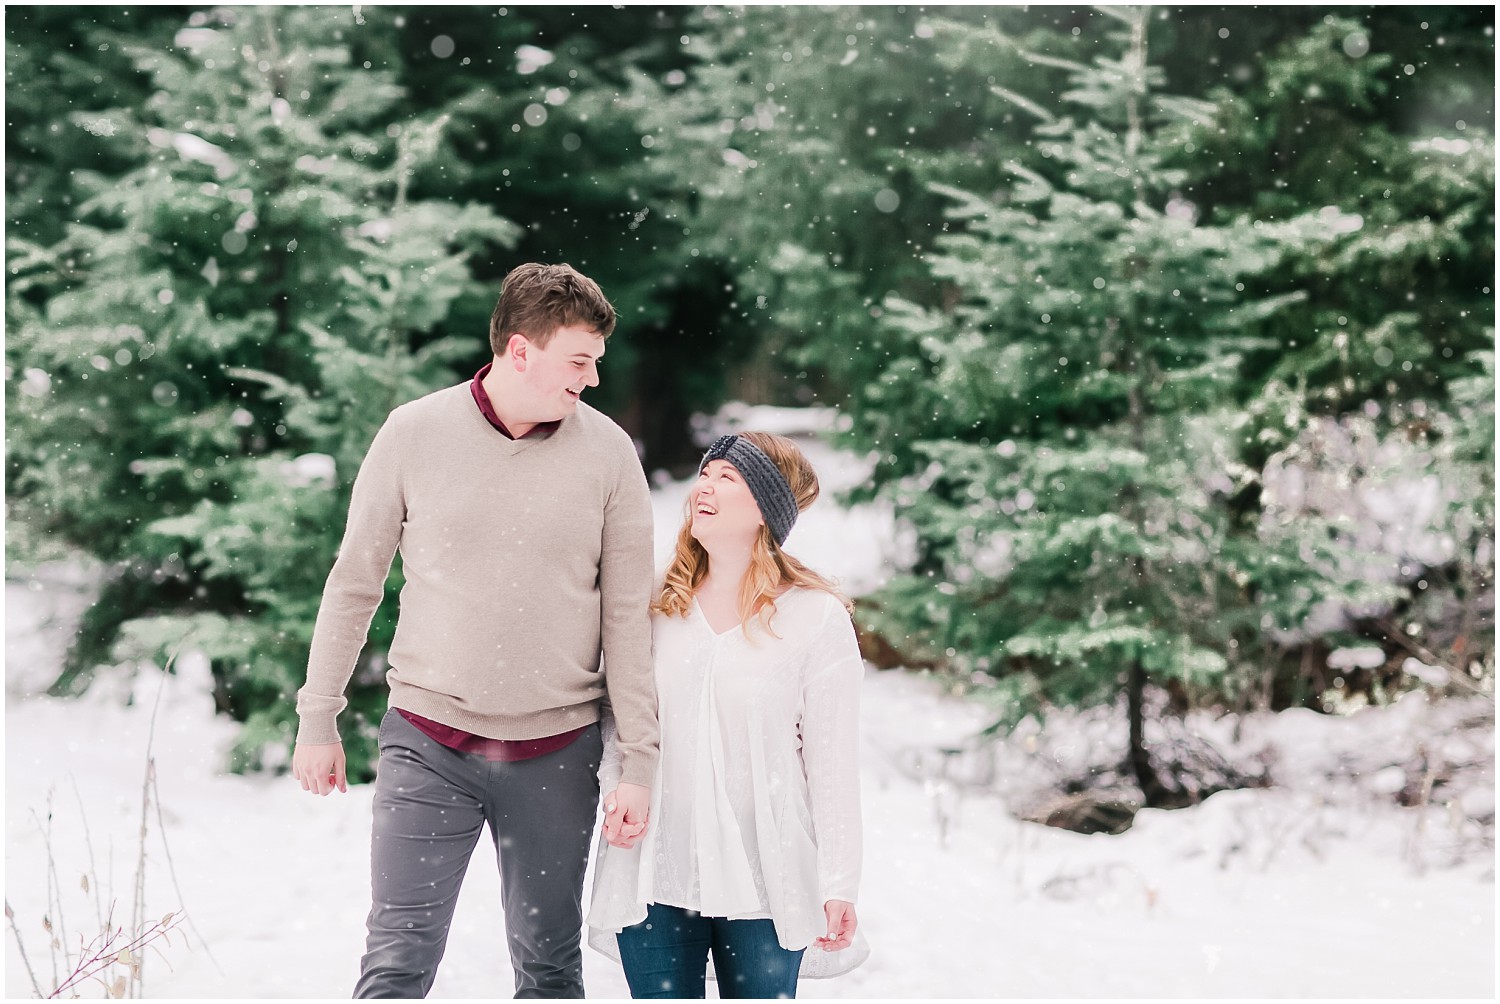 Snowy Gold Creek Pond Engagement Session | Conor & Sarah